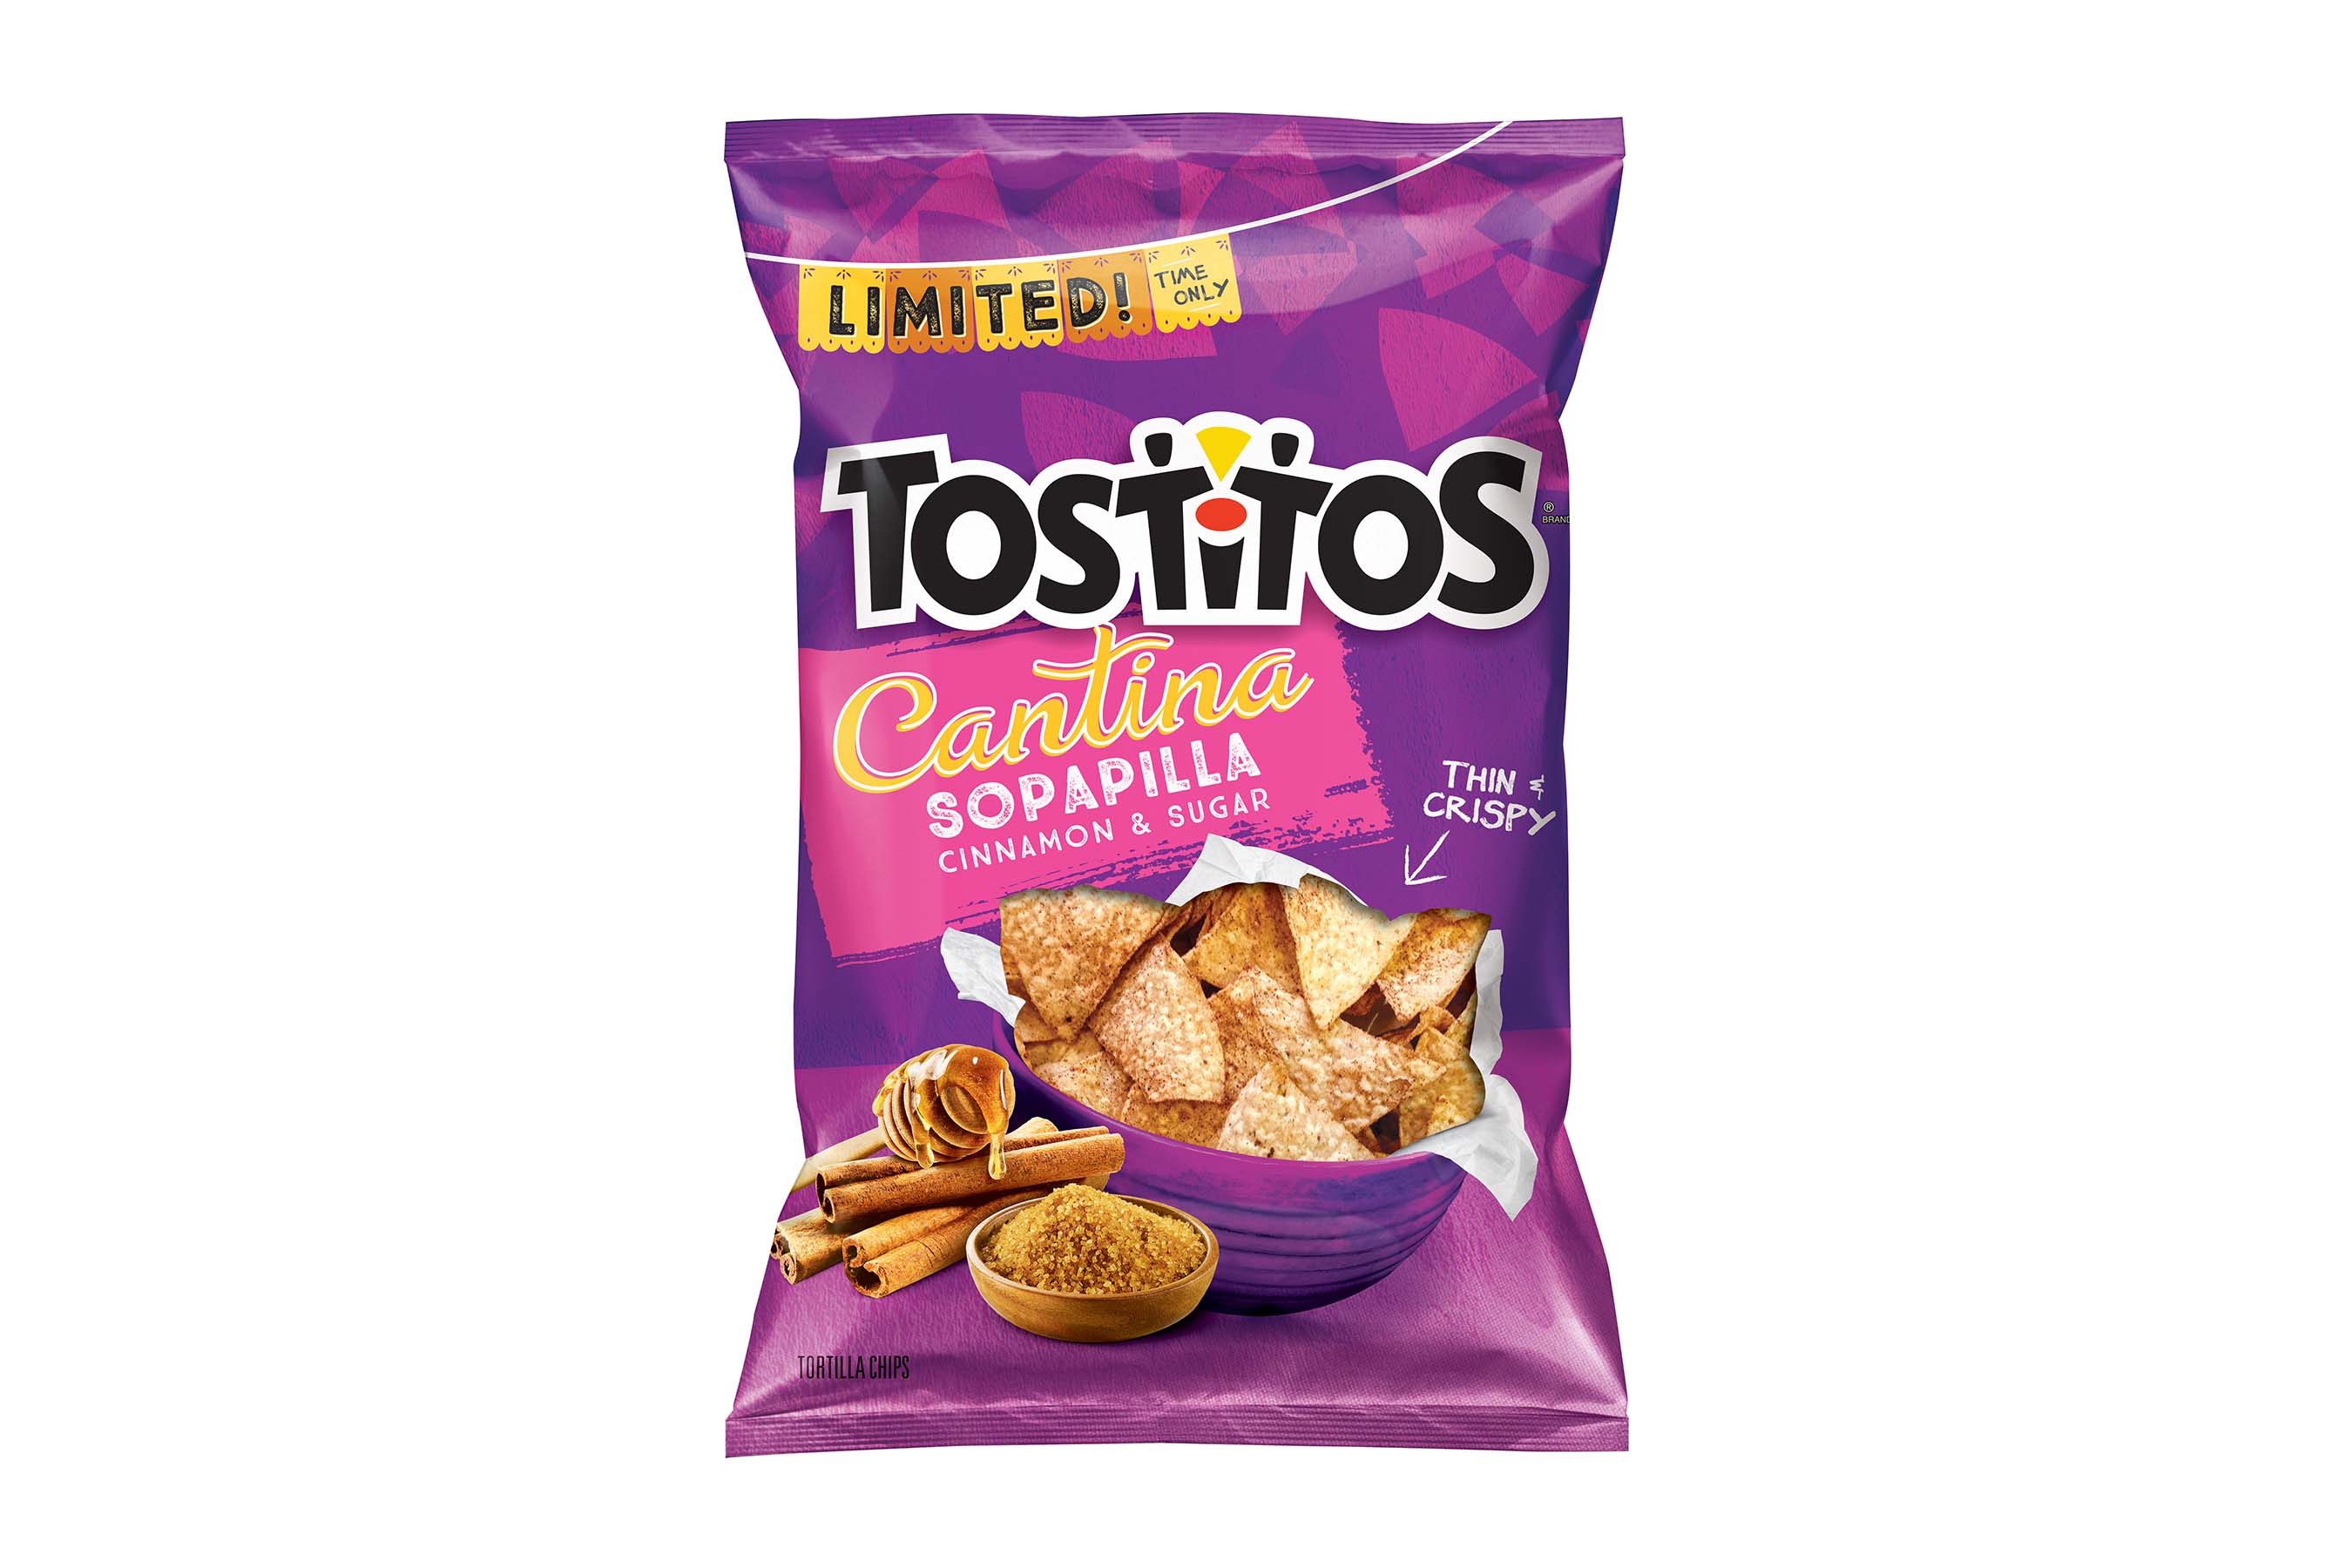 Tostitos Cantina is launching limited-time only sopapilla flavored tortilla chips that combine cinnamon, sugar and a touch of honey for a sweet way to celebrate Cinco de Mayo.